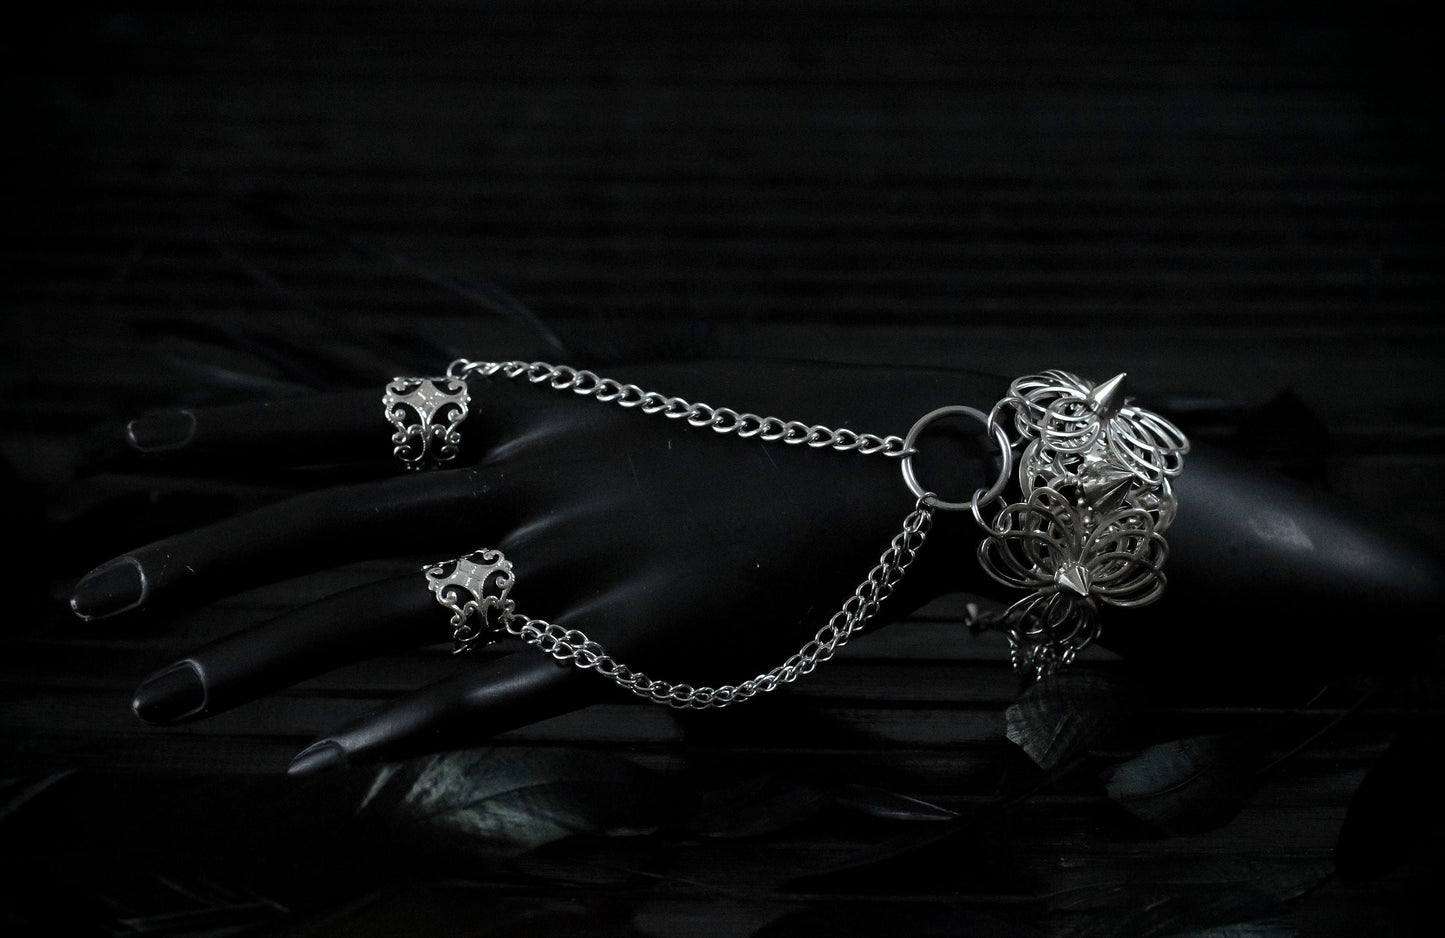 A Myril Jewels punk hand chain bracelet ring with ornate filigree detailing cascades over a black-clad hand, reflecting the brand's mastery in crafting dark avant-garde accessories. Ideal for gothic, Neo Gothic, and alternative styles, this piece is perfect for enhancing Halloween outfits, gothic-chic looks, and Witchcore ensembles. It's also an eye-catching choice for those seeking statement rave party jewelry or festival jewels, offering daily wear versatility for the minimal goth aesthetic